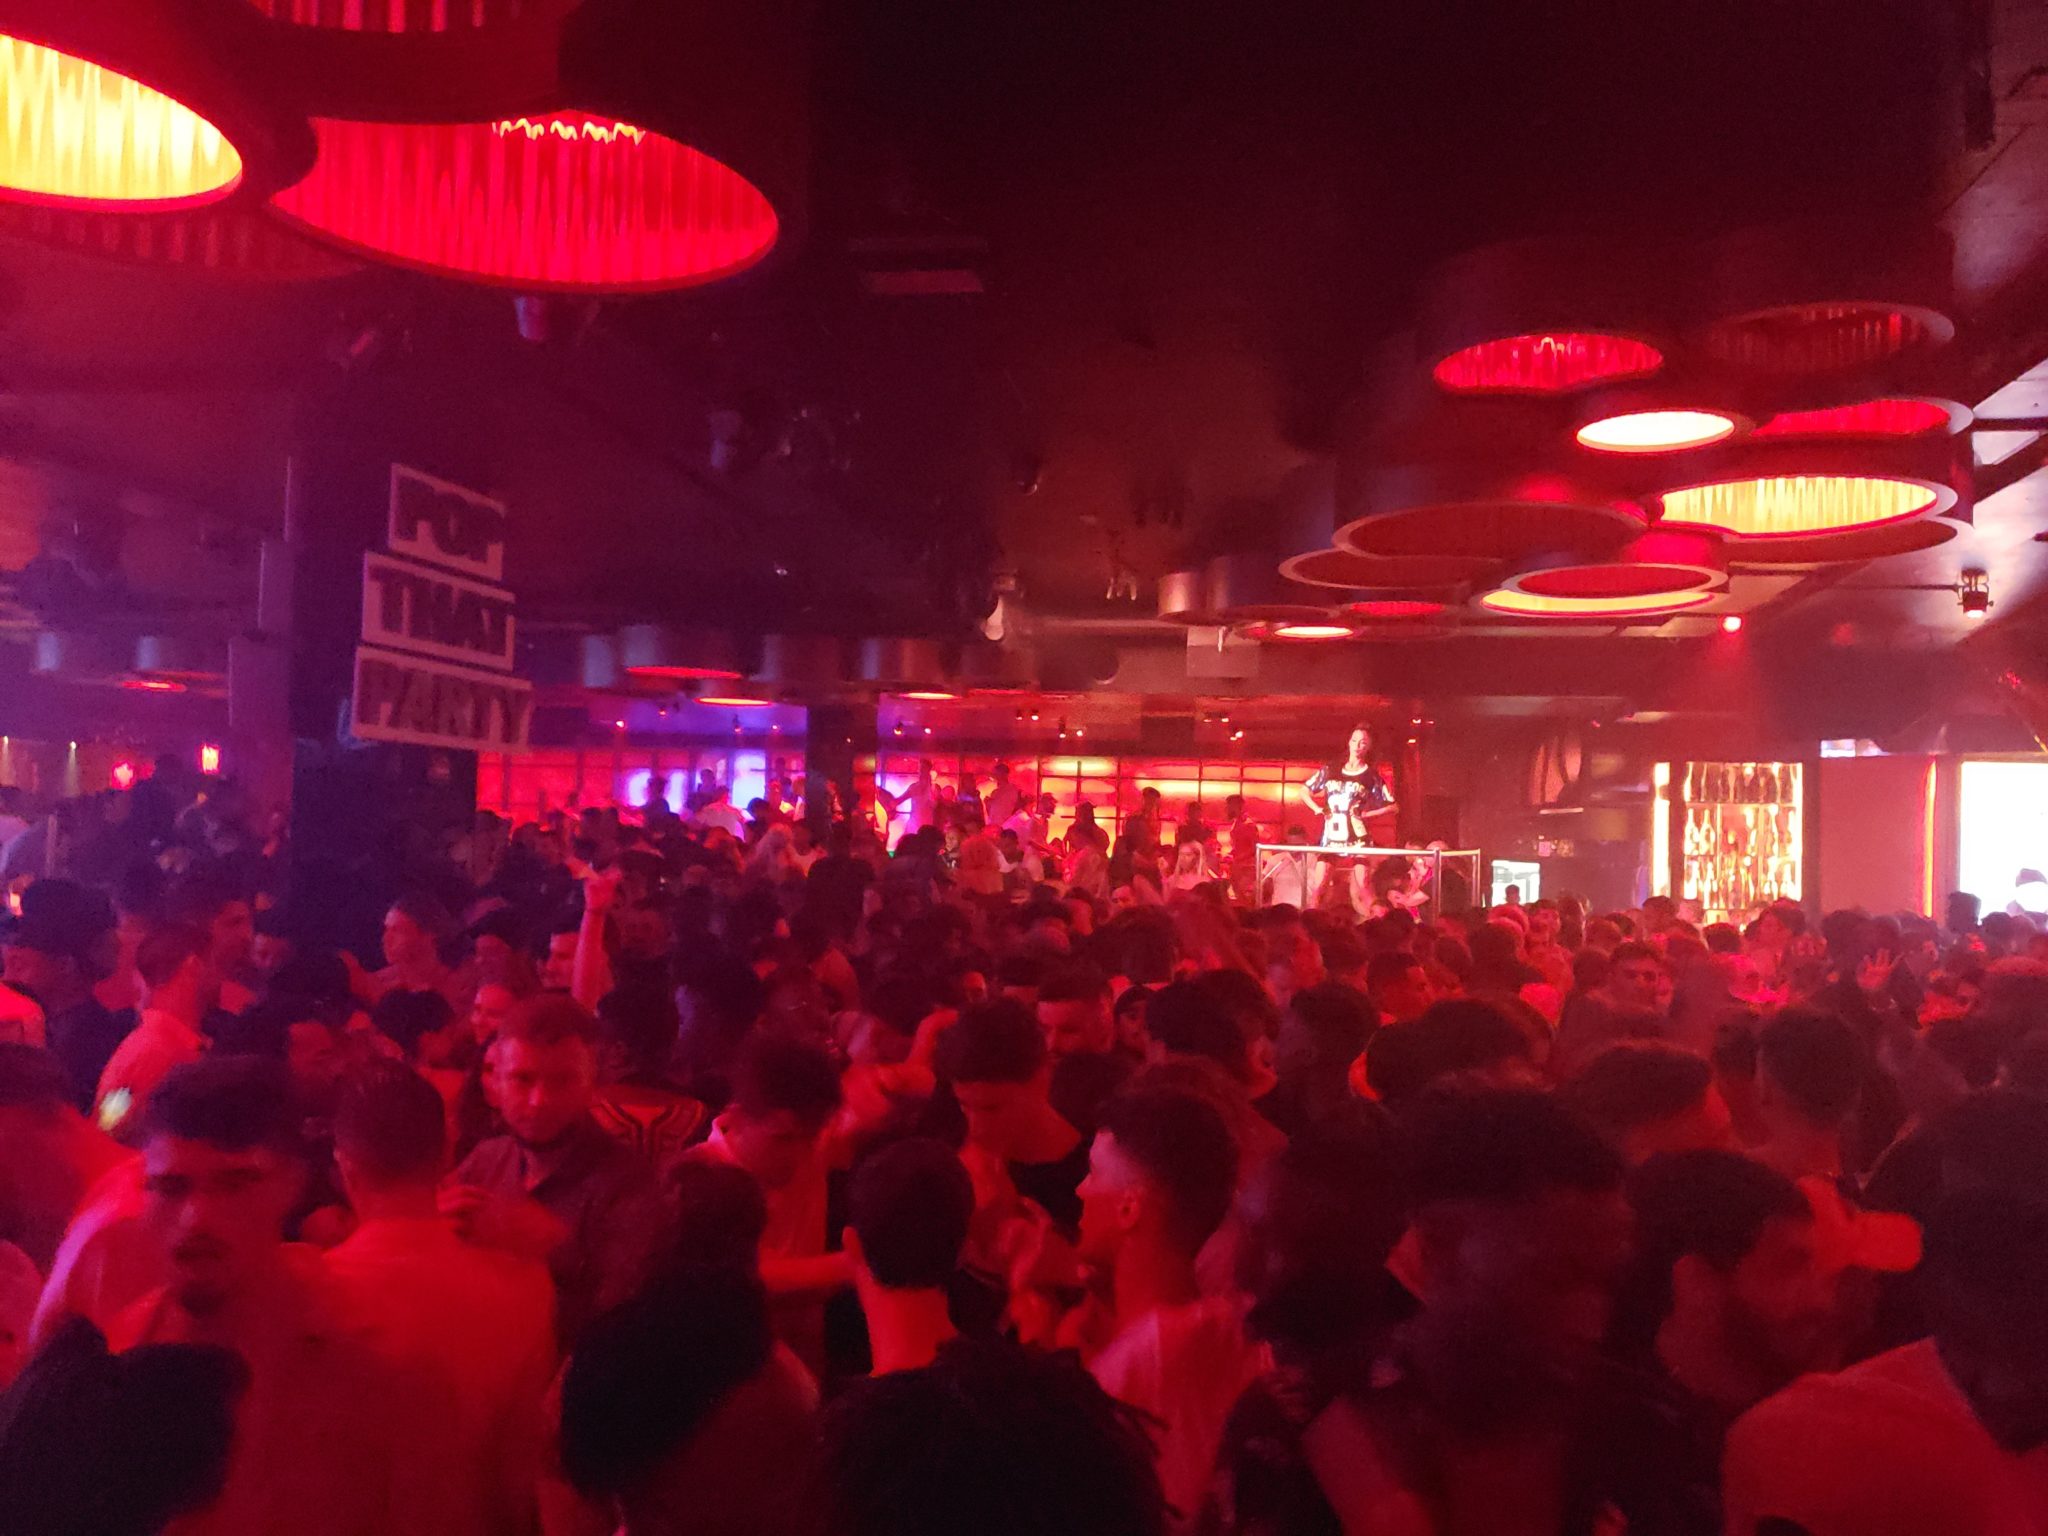 a crowd of people in a room with red lights